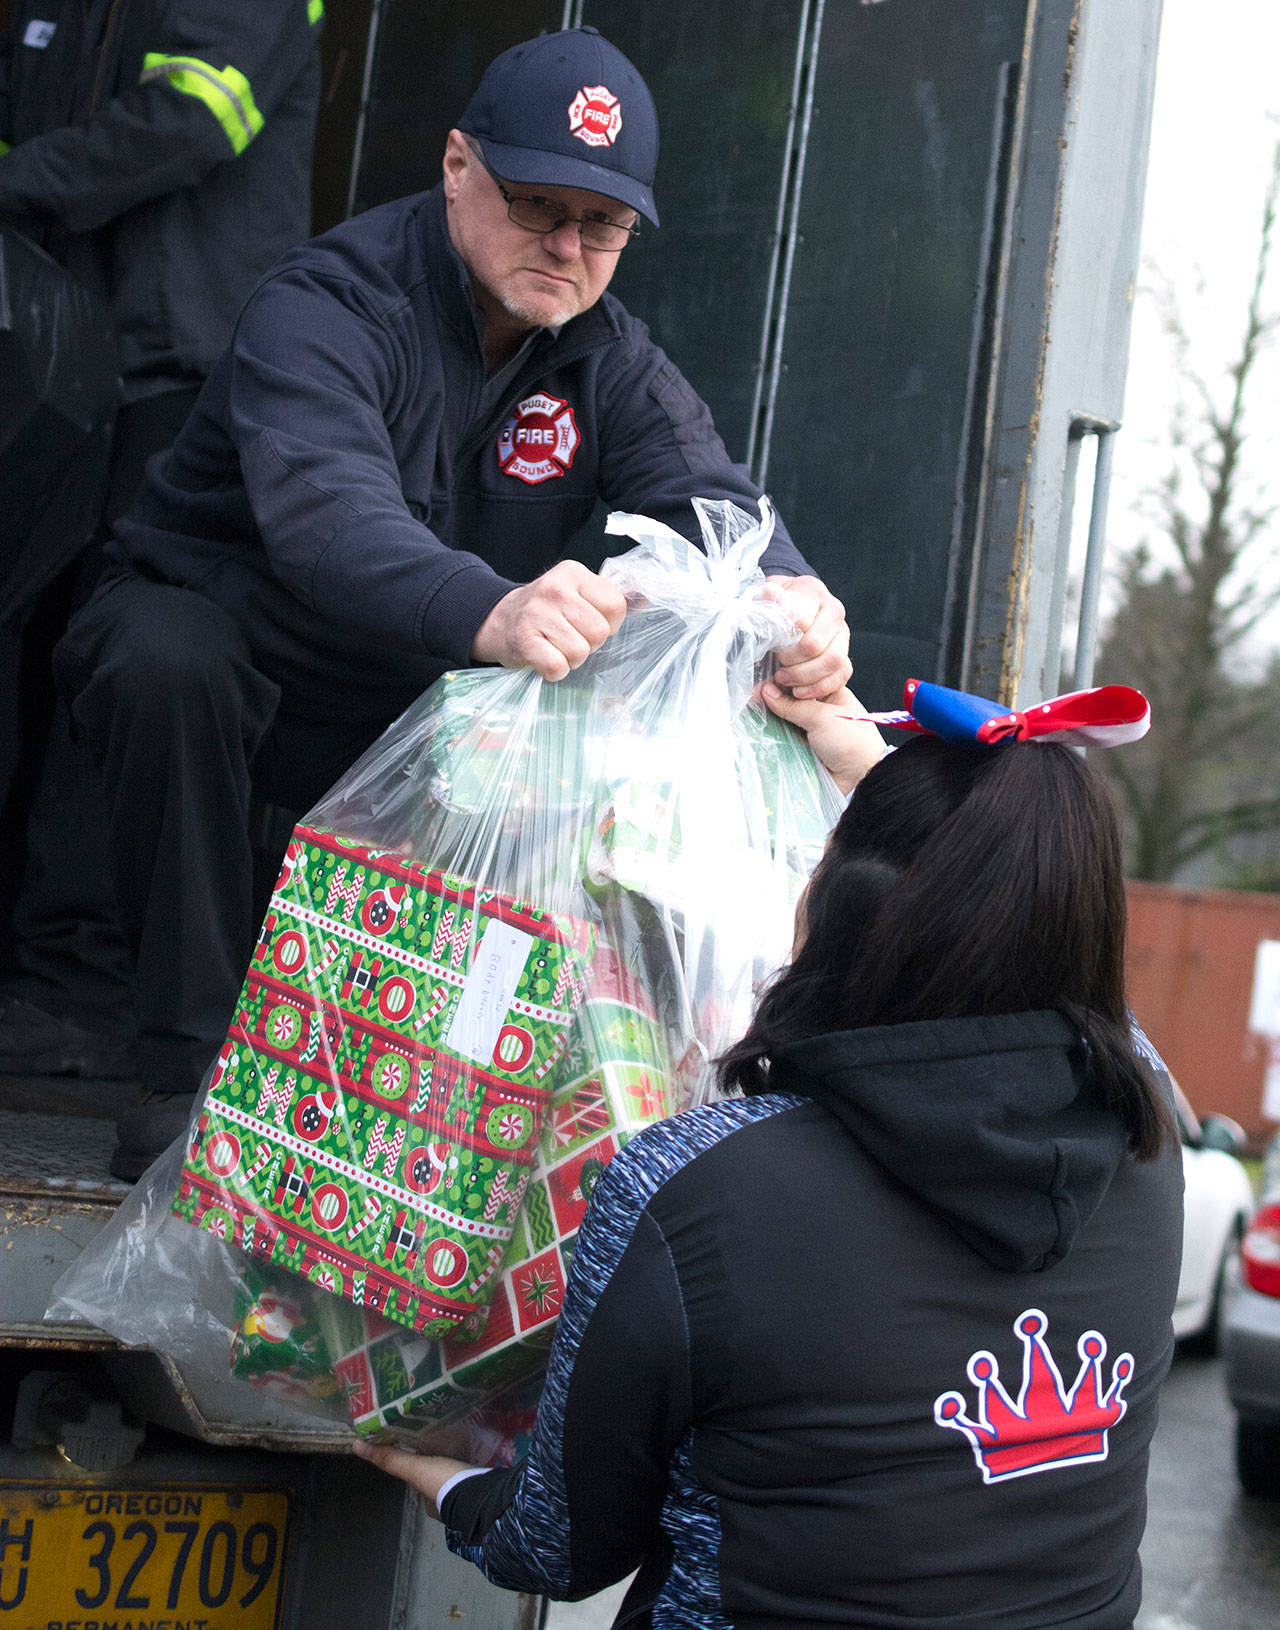 Firefighters and volunteers collected thousands of toys for families in need during the Toys for Joy program this season. COURTESY PHOTO, Puget Sound Regional Fire Authority